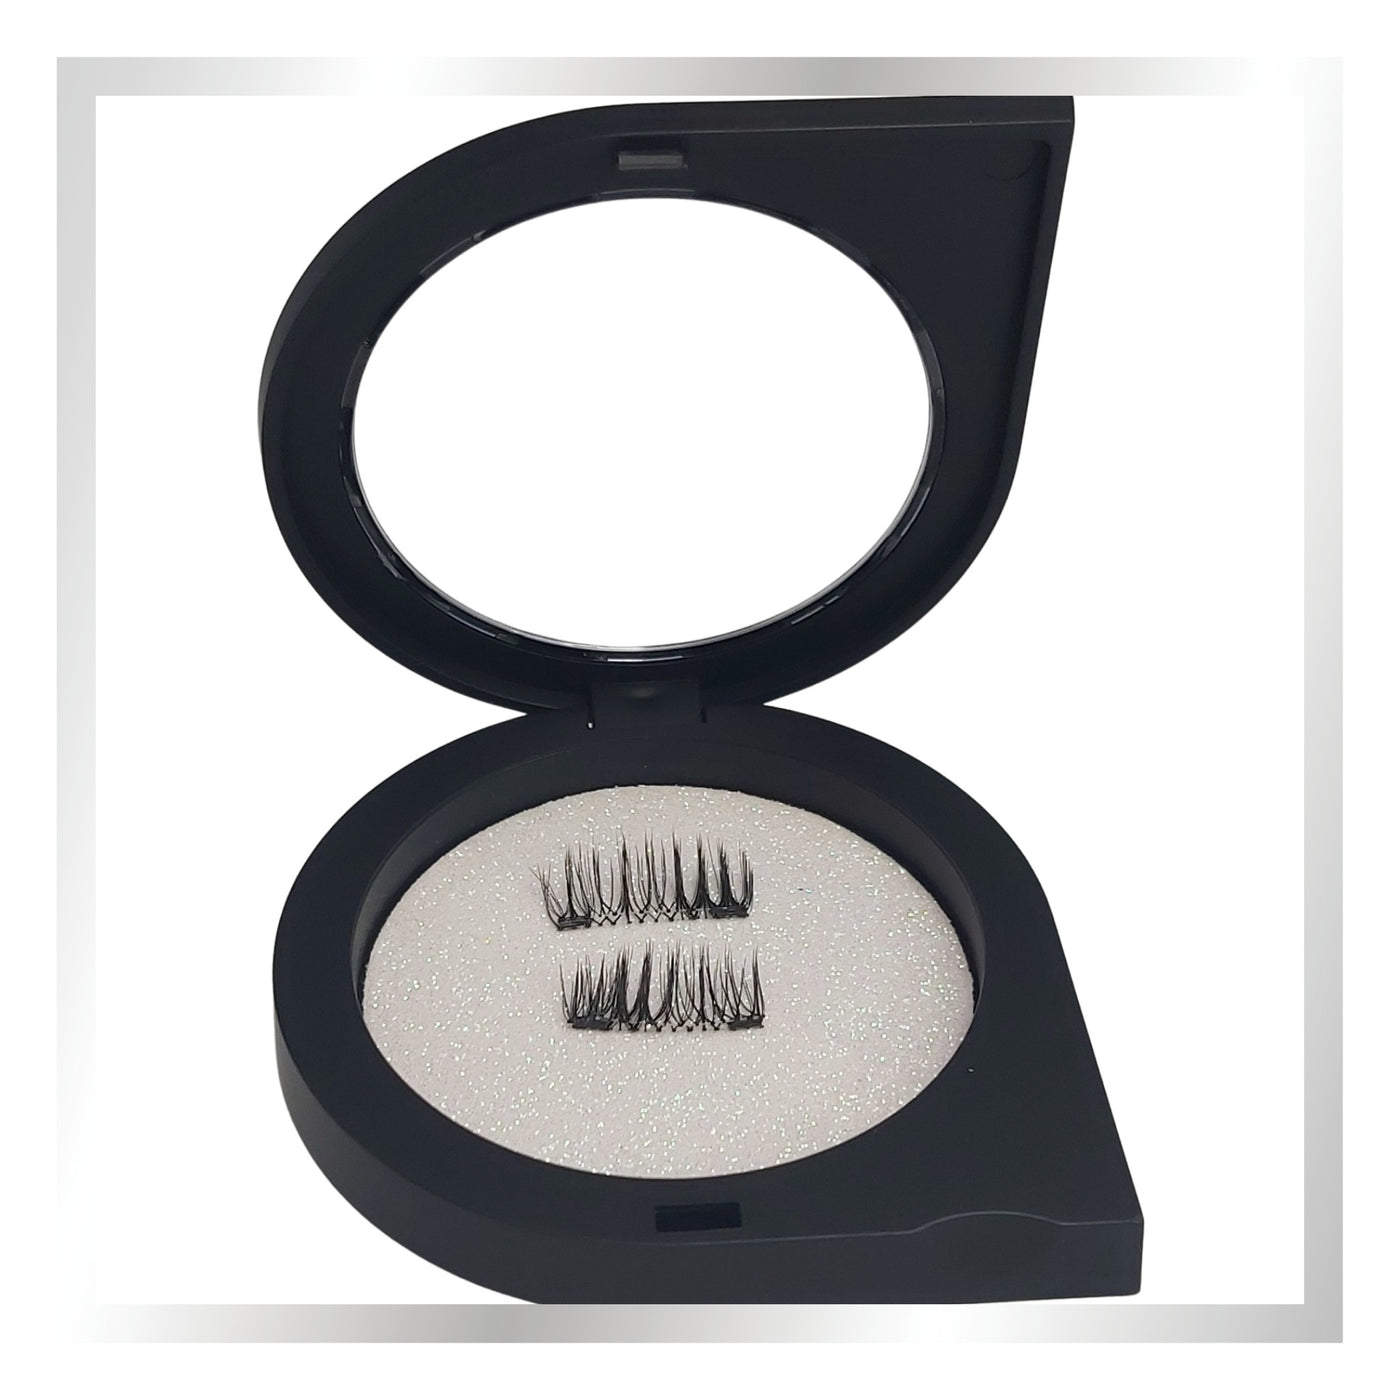 Magneettiripset 4Beauty Finland Magnetic Lashes Tokyo natural look design in finland high quality magnetic lashes